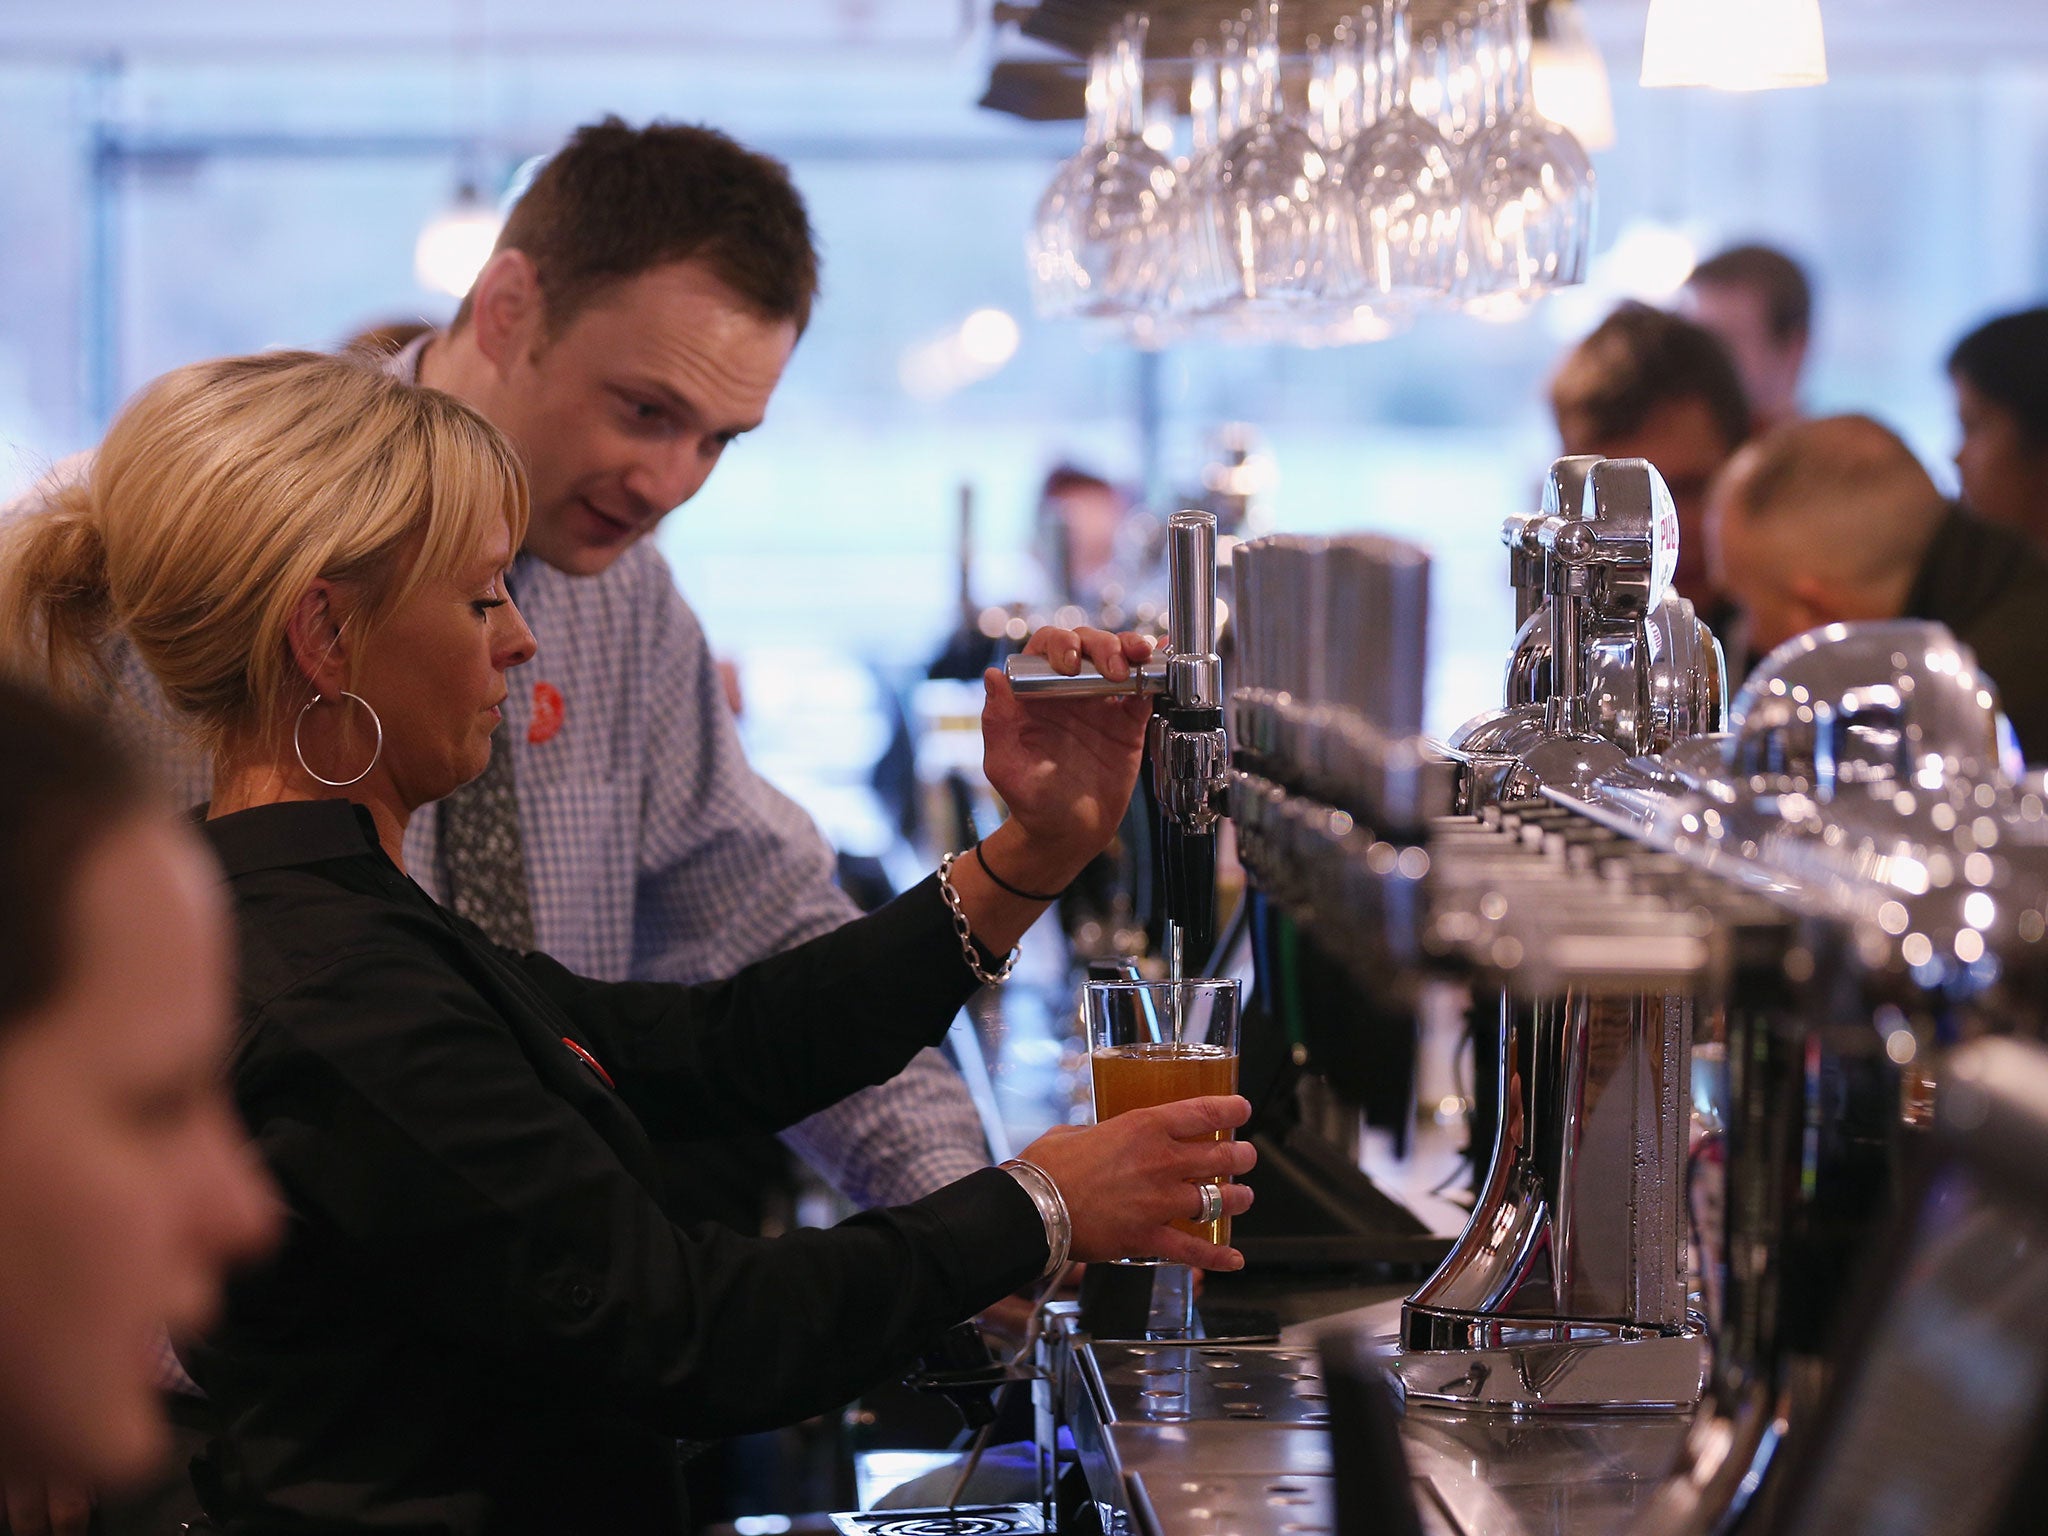 The JD Wetherspoon pub, the 'Hope And Champion', opens for the first day of trading in the Extra Motorway Service Area at junction 2 of the M40 motorway on January 21, 2014 in Beaconsfield, England.